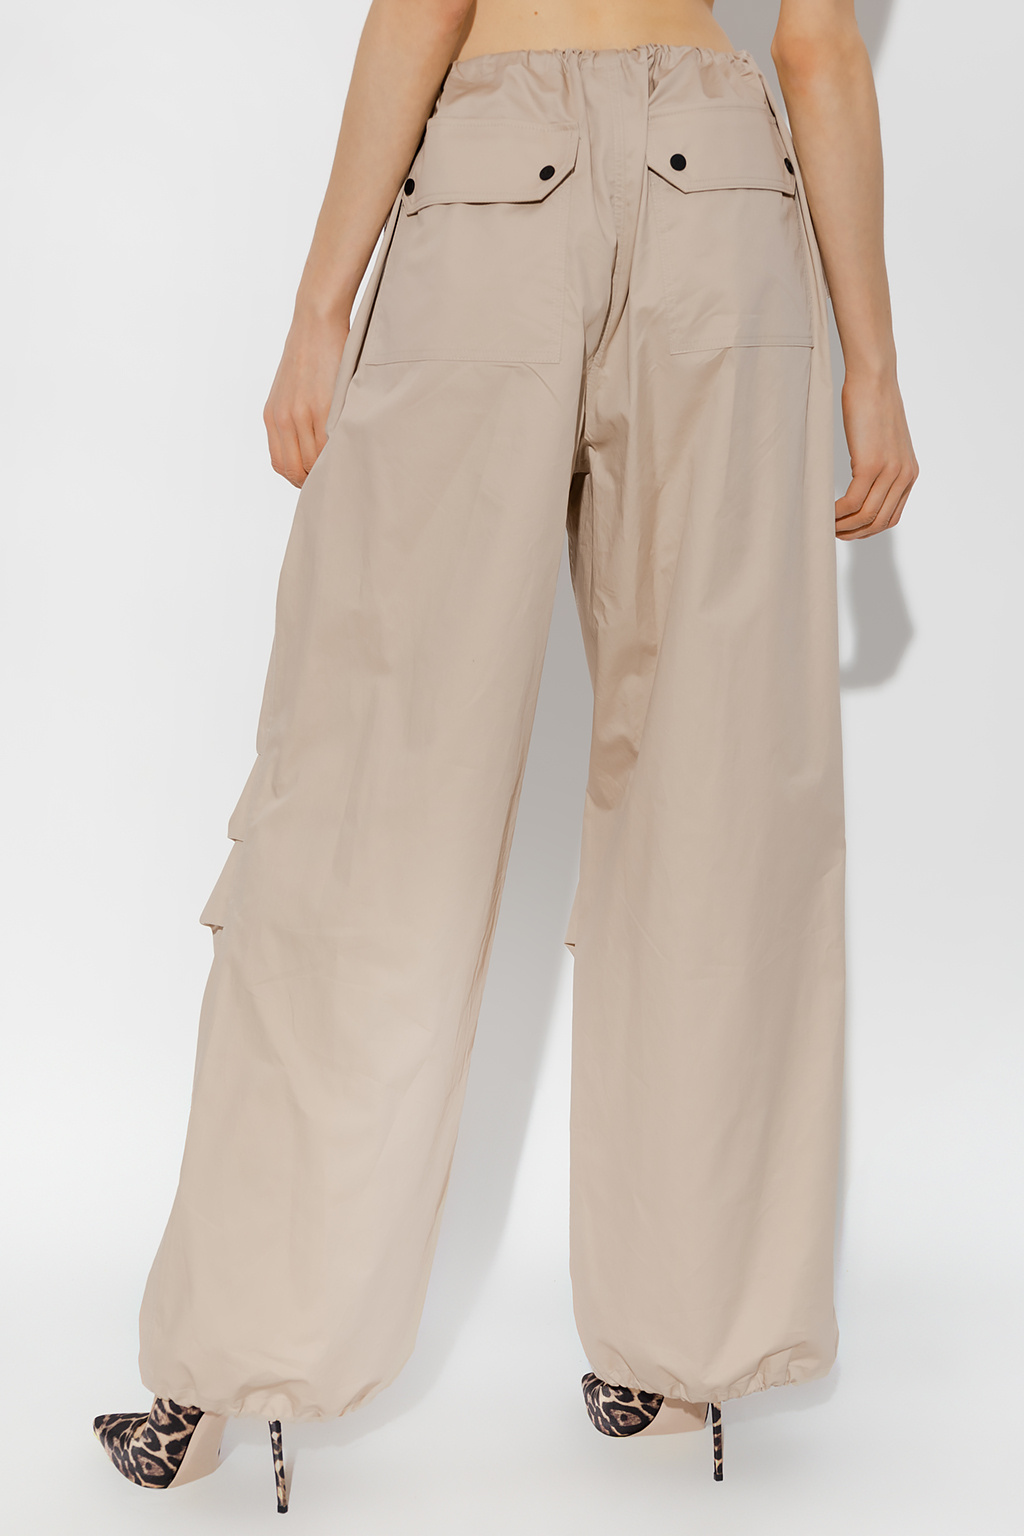 The Mannei ‘Ajos’ trousers